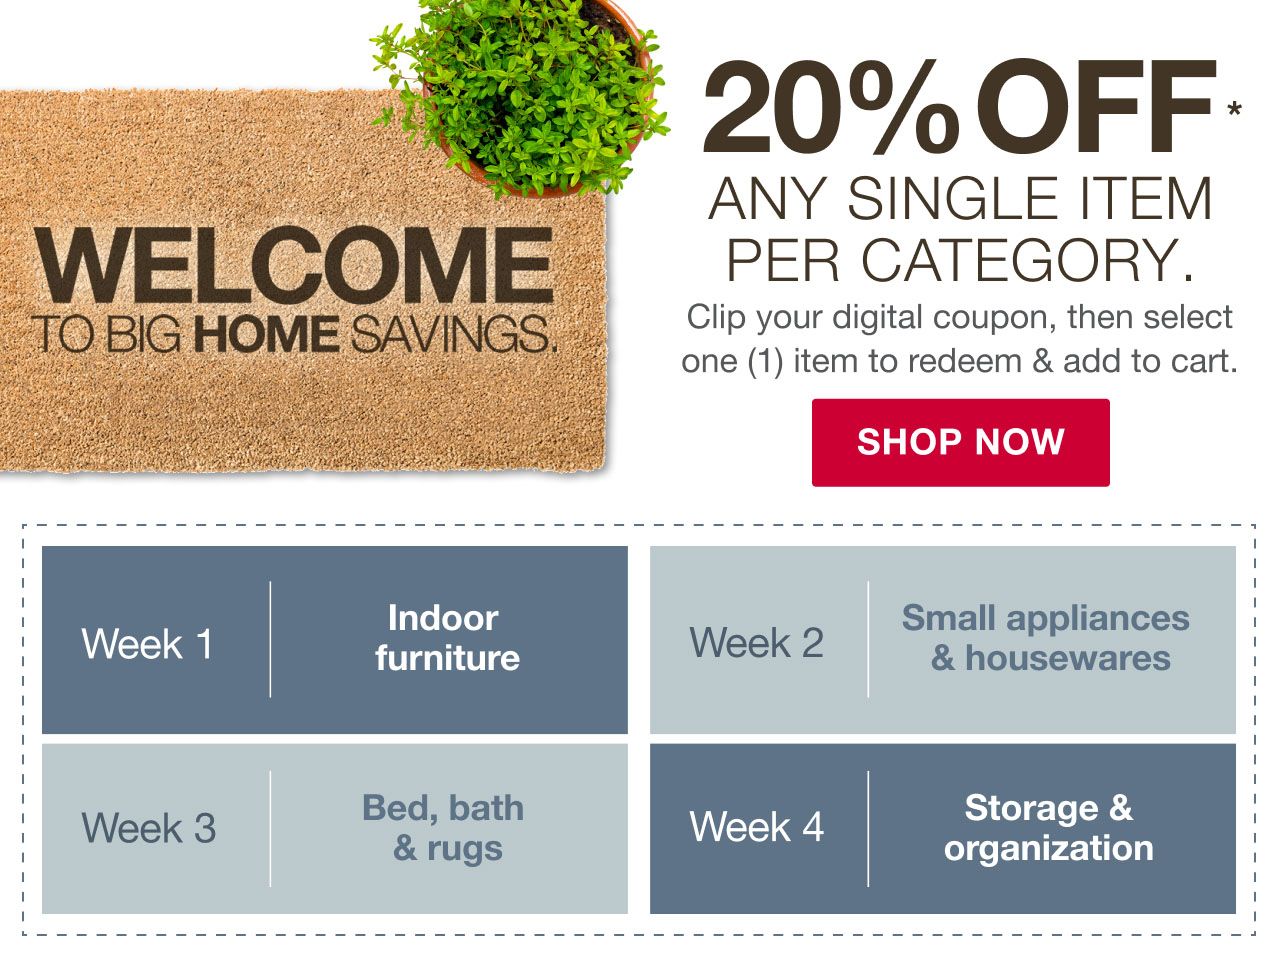 Welcome to Big Home Savings. 20% off any single item per category. Week 1 - Indoor Furniture. Week 2 - Small appliances & housewares. Week 3 - Bed, bath & rugs. Week 4 - Storage & organization. Clip your digital coupon, then select one (1) item to redeem & add to cart. Click to shop now.